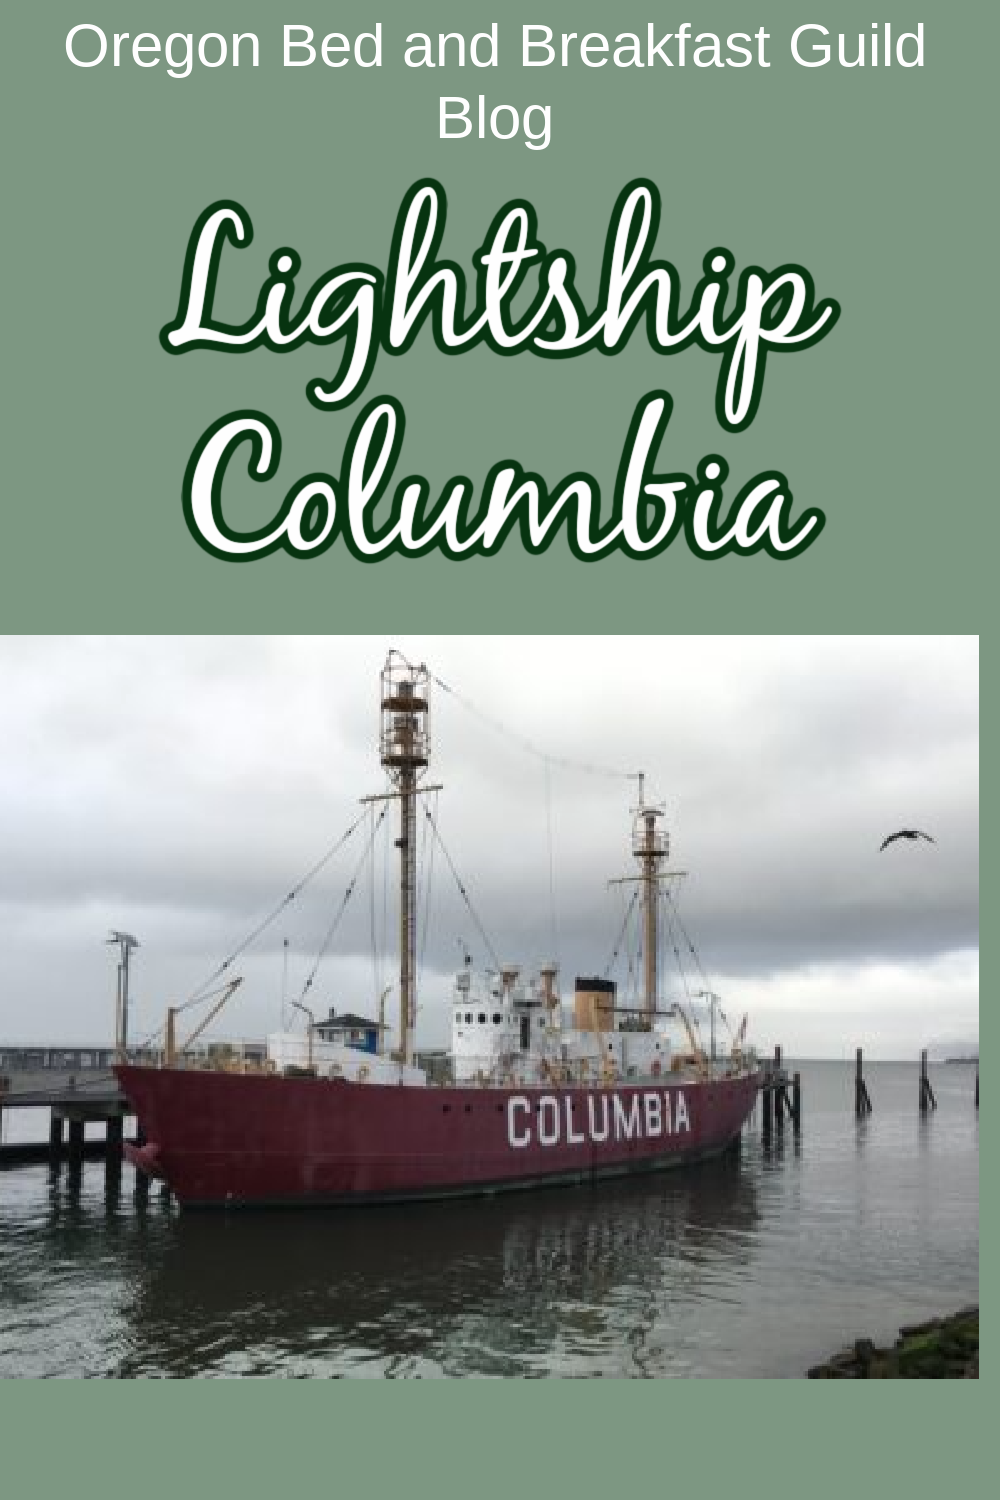 Pinterest Pin of the Lighthouse Columbia